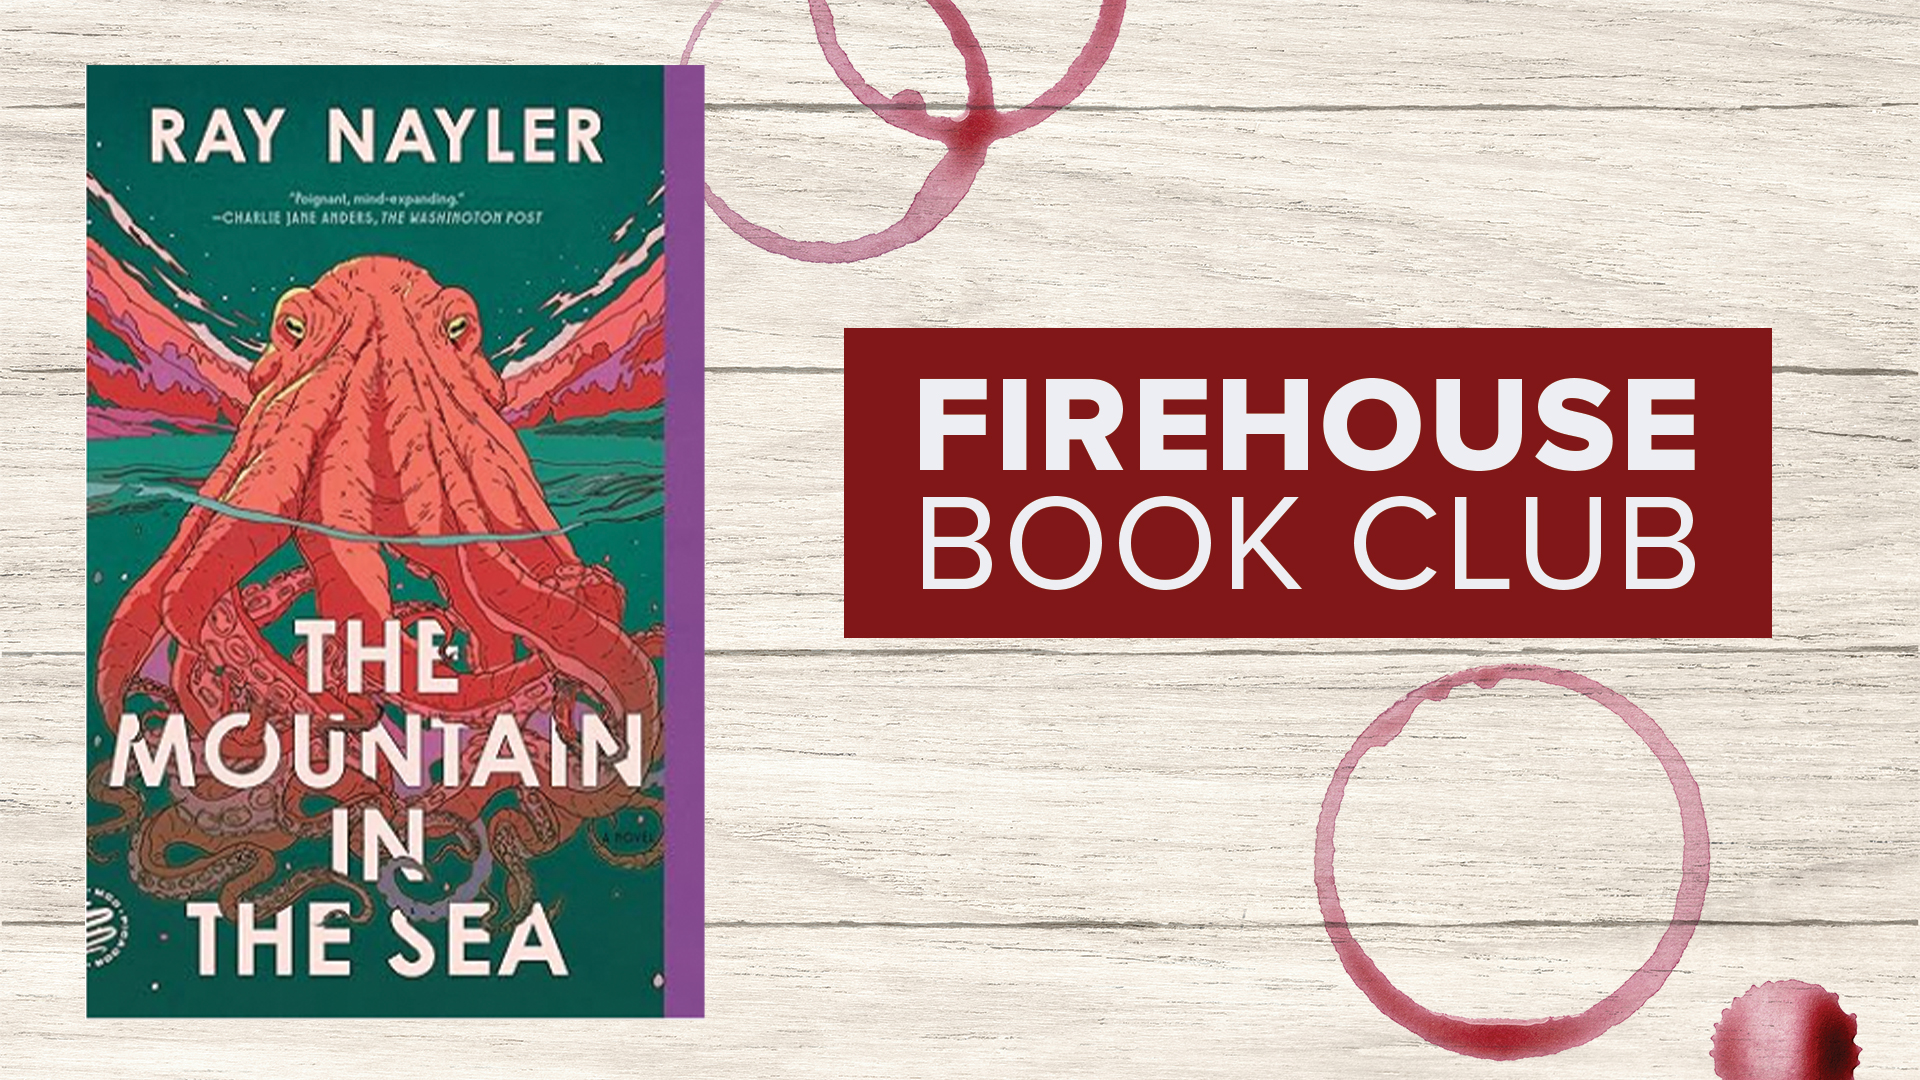 Firehouse Book Club in Rapid City SD - The Mountain in the Sea